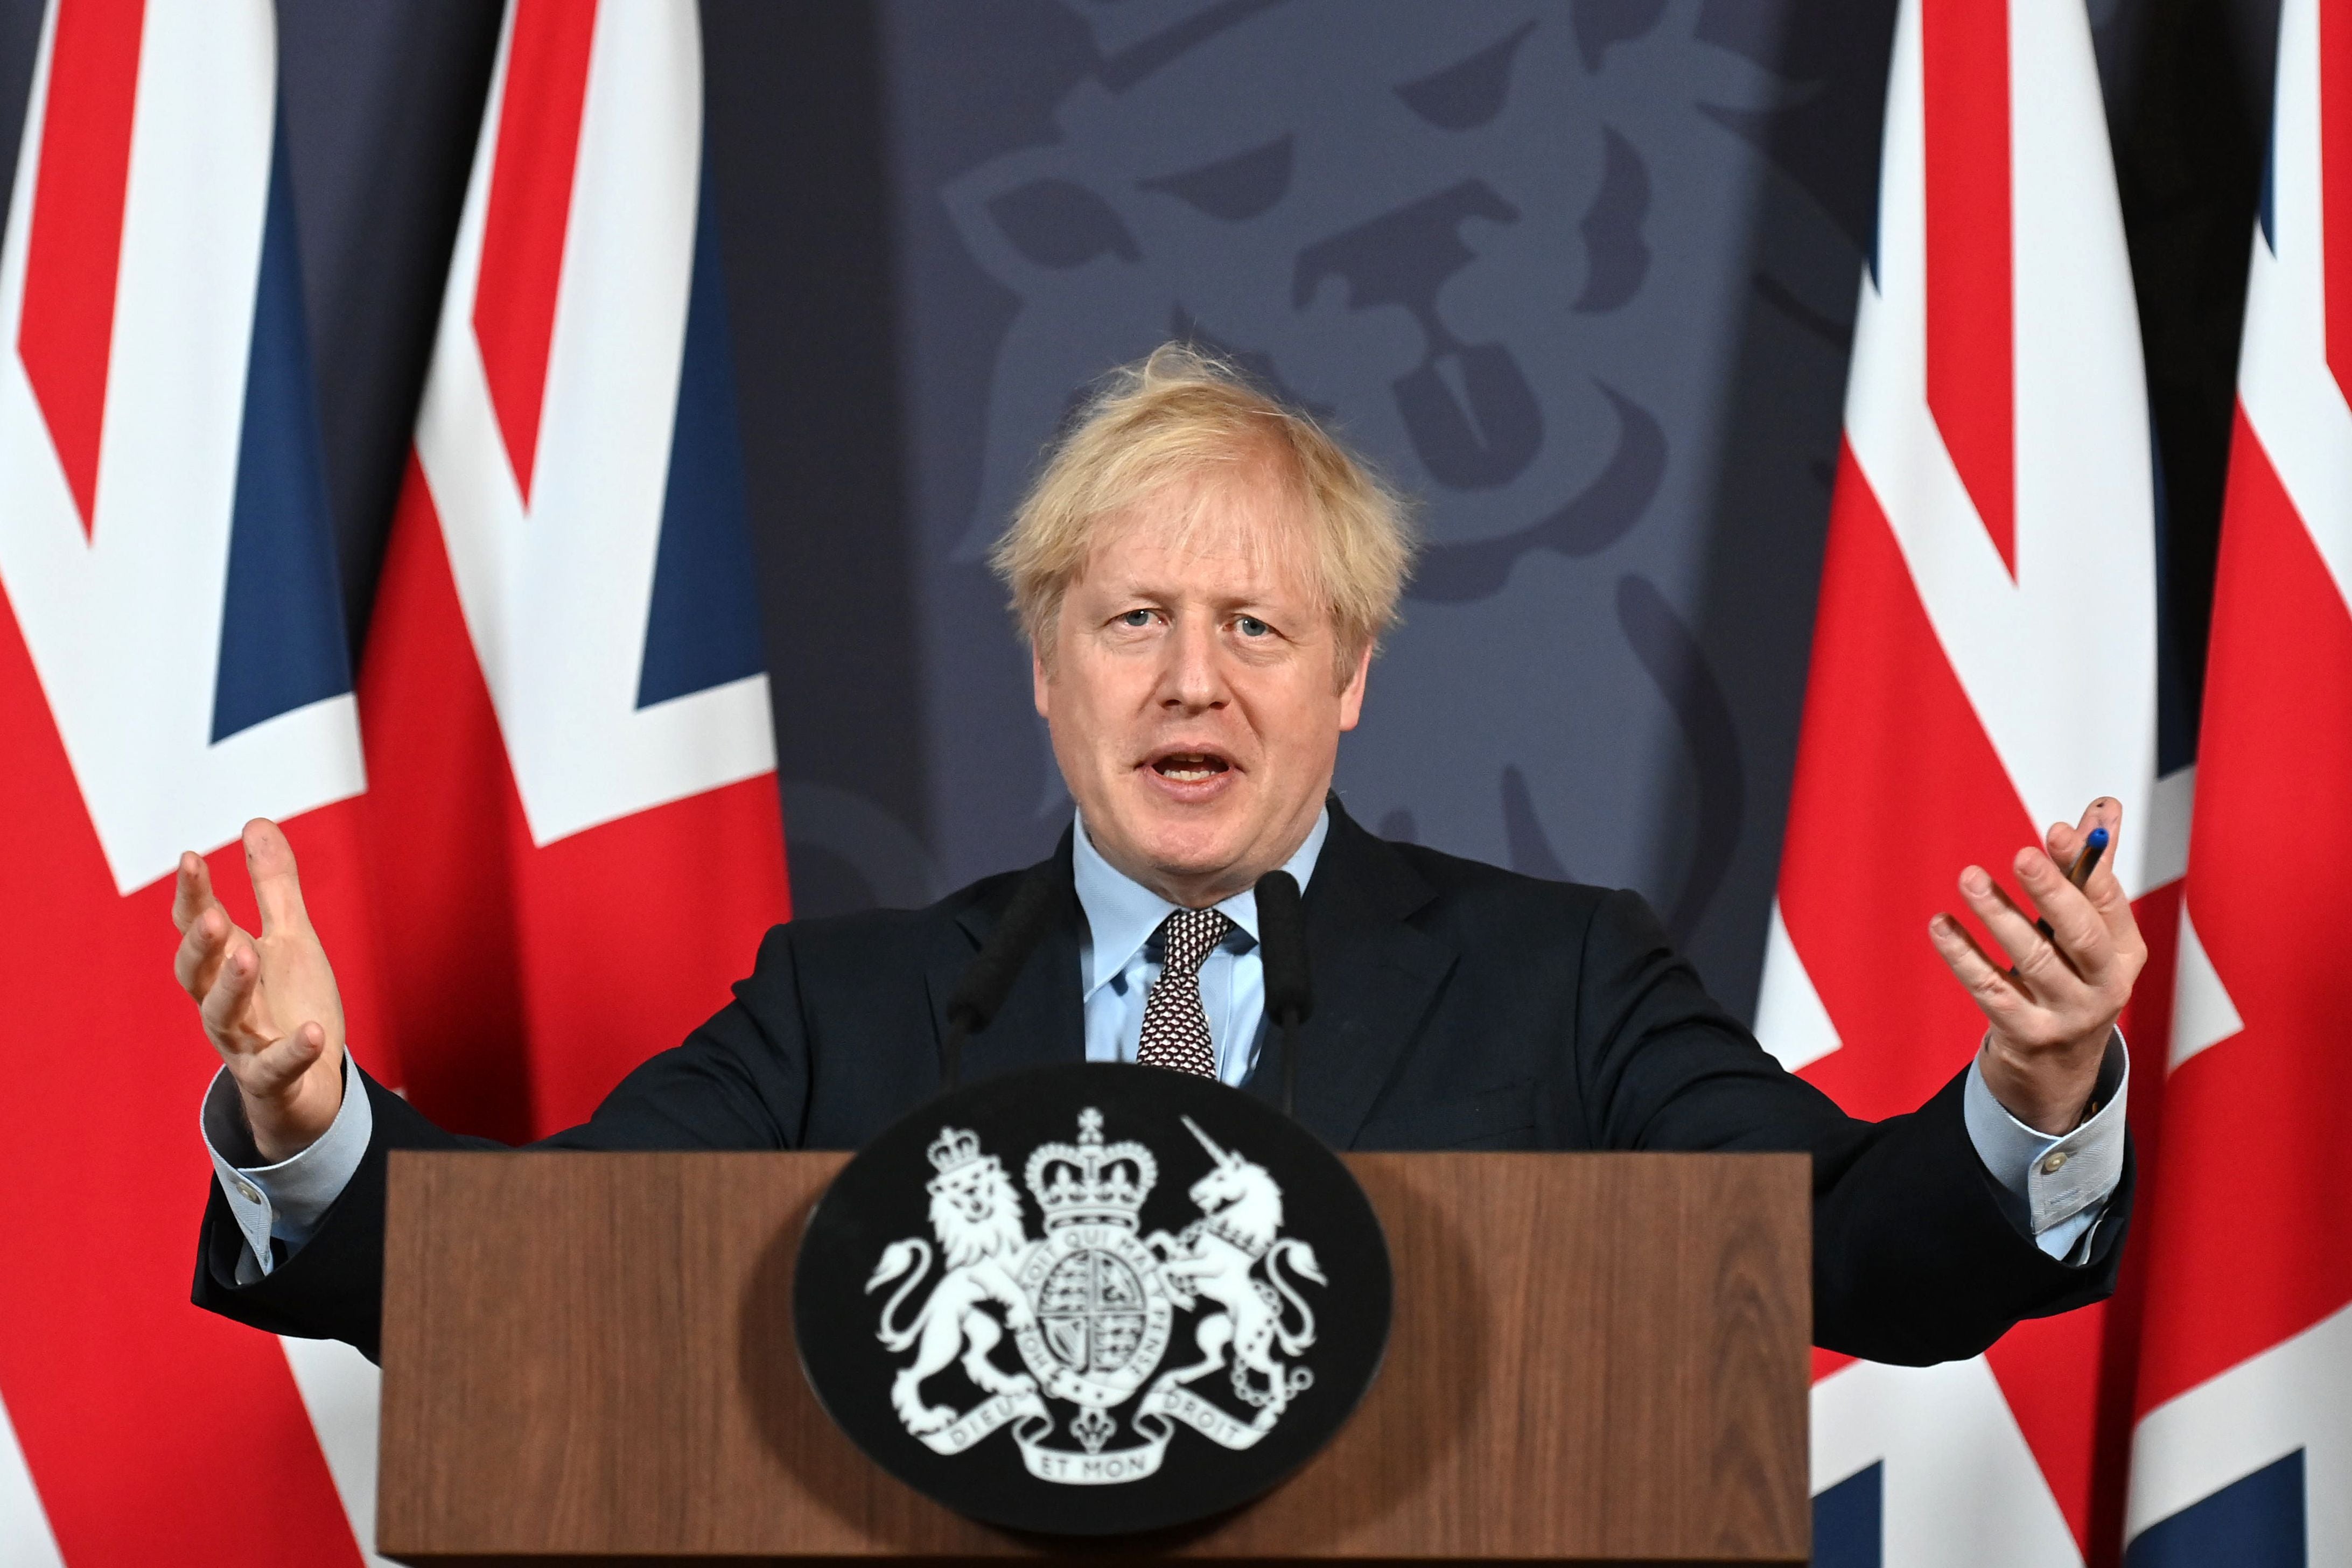 Boris Johnson continues to advertise Brexit’s flaws